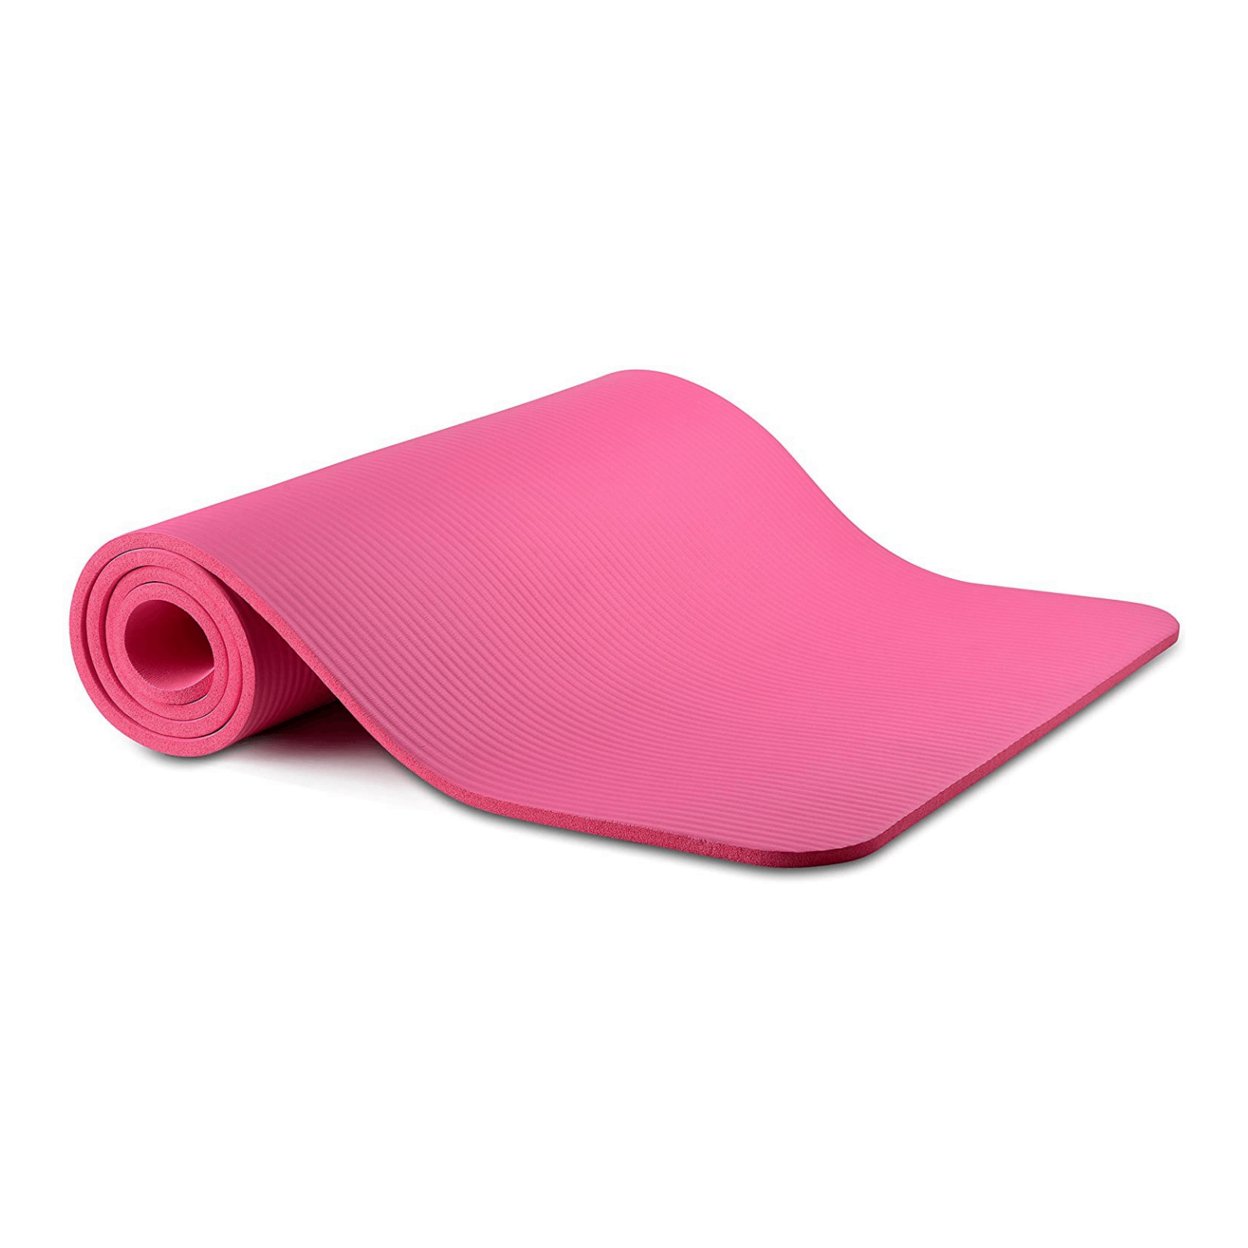 Thick Yoga And Pilates Exercise Mat With Carrying Strap - Pink